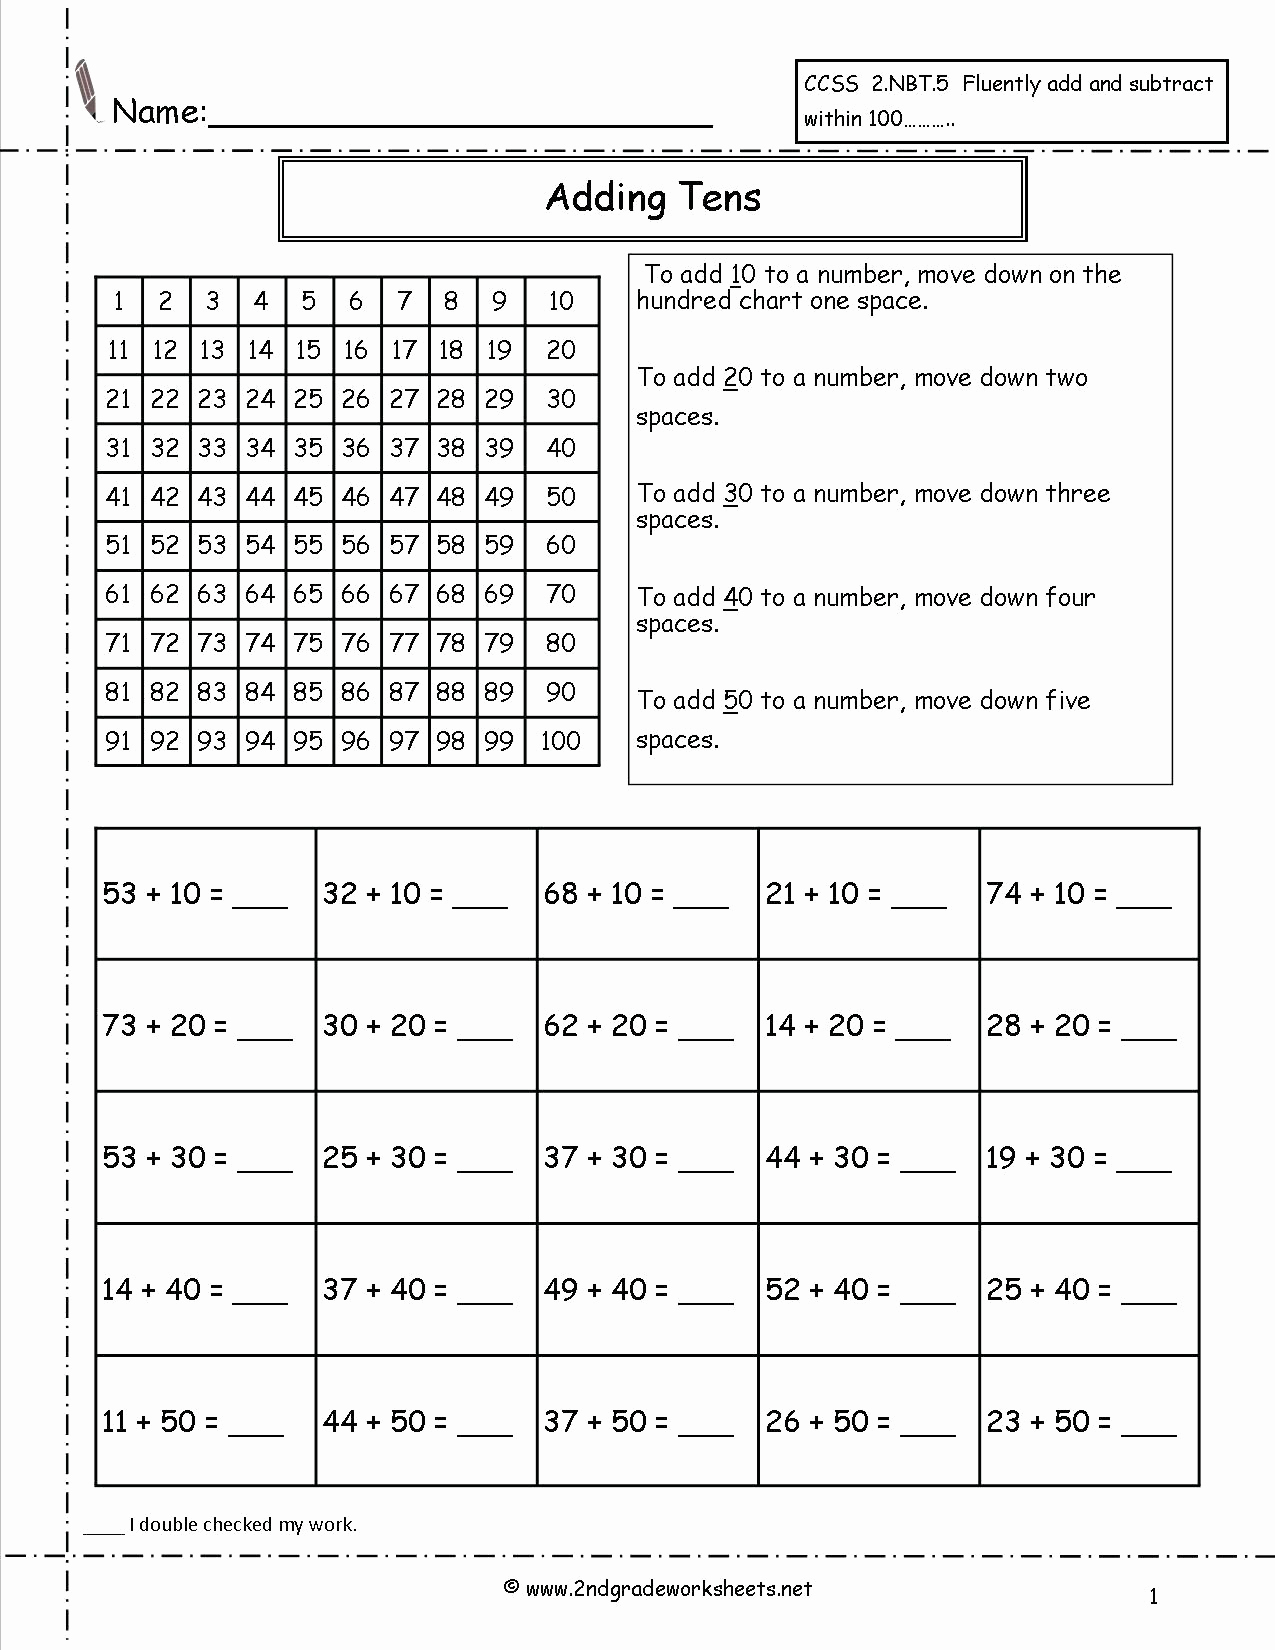 6th Grade Math Puzzle Worksheets Fresh Printable Puzzles for 6th Grade